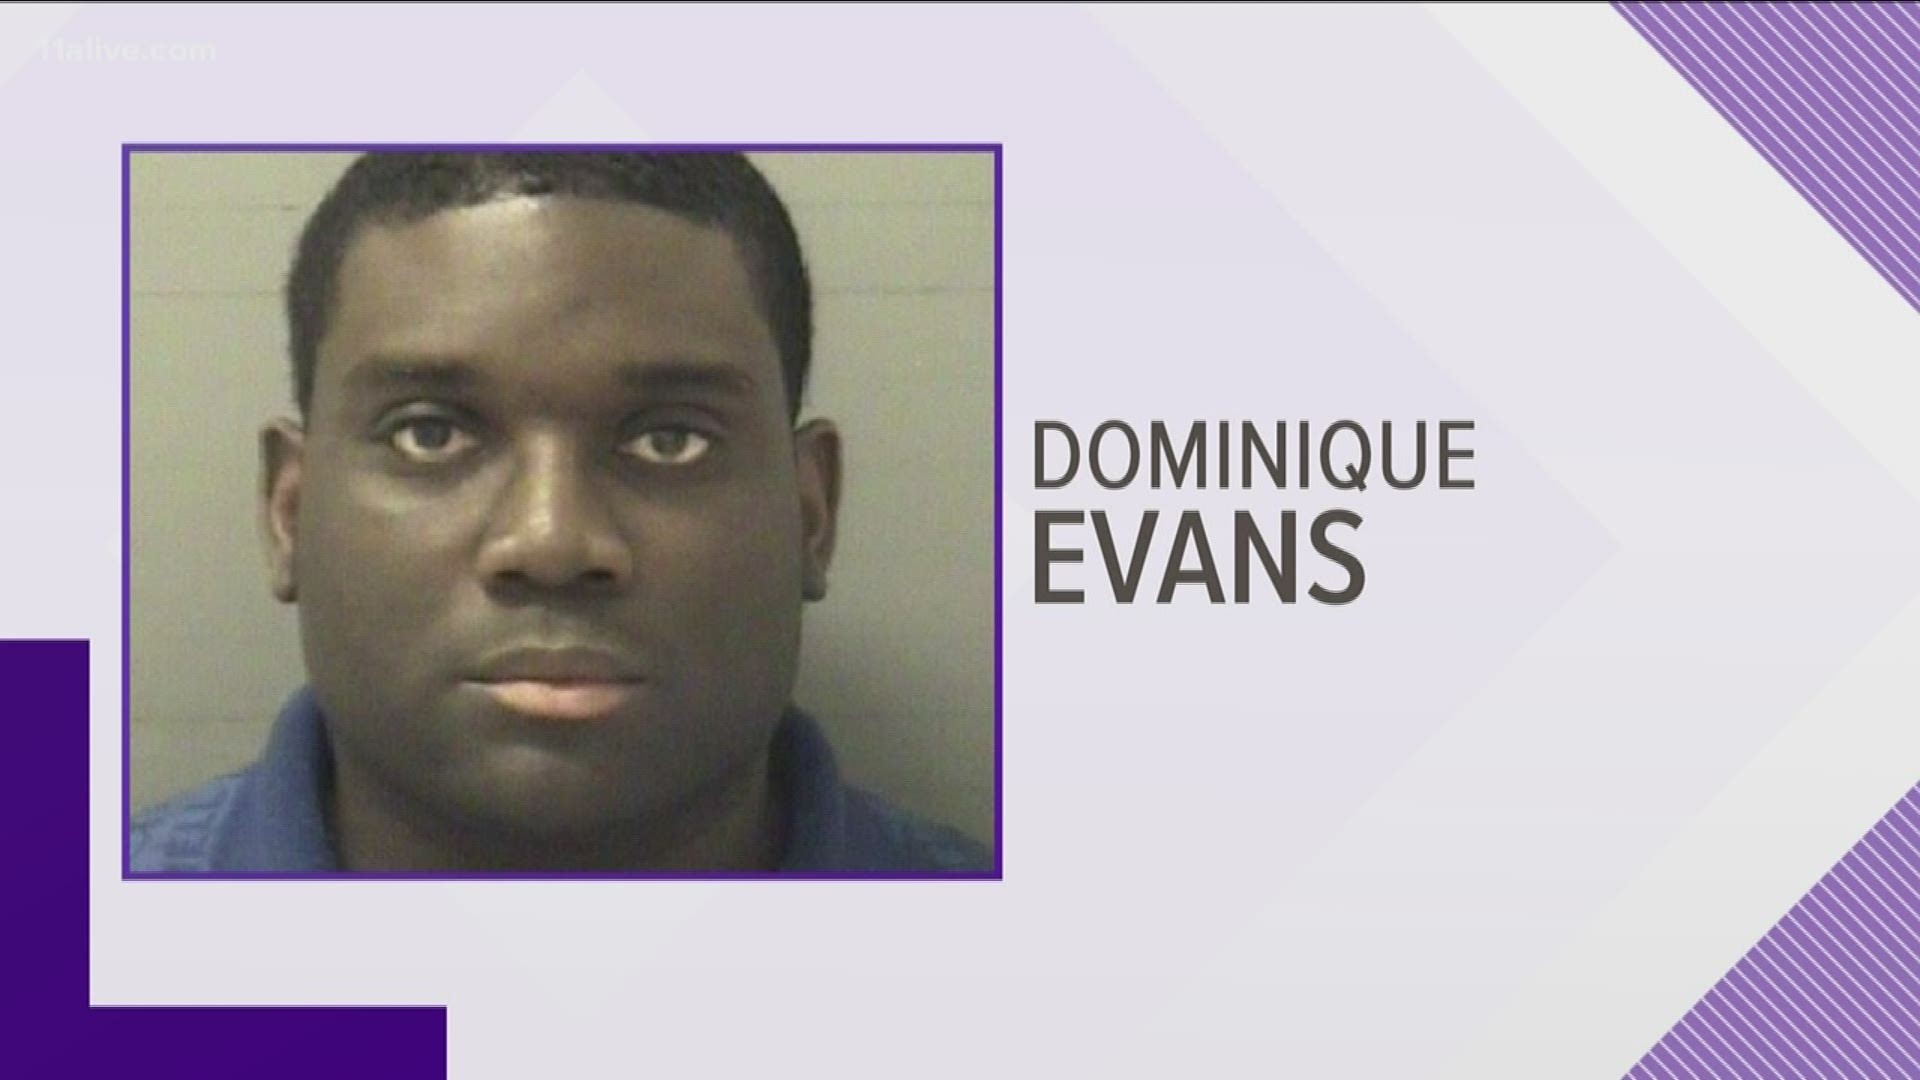 The Smyrna Police Department said they arrested Dominique Evans Sept. 10 for solicitation of sodomy and obscene telephone calls to a minor. Both charges are misdemeanor.